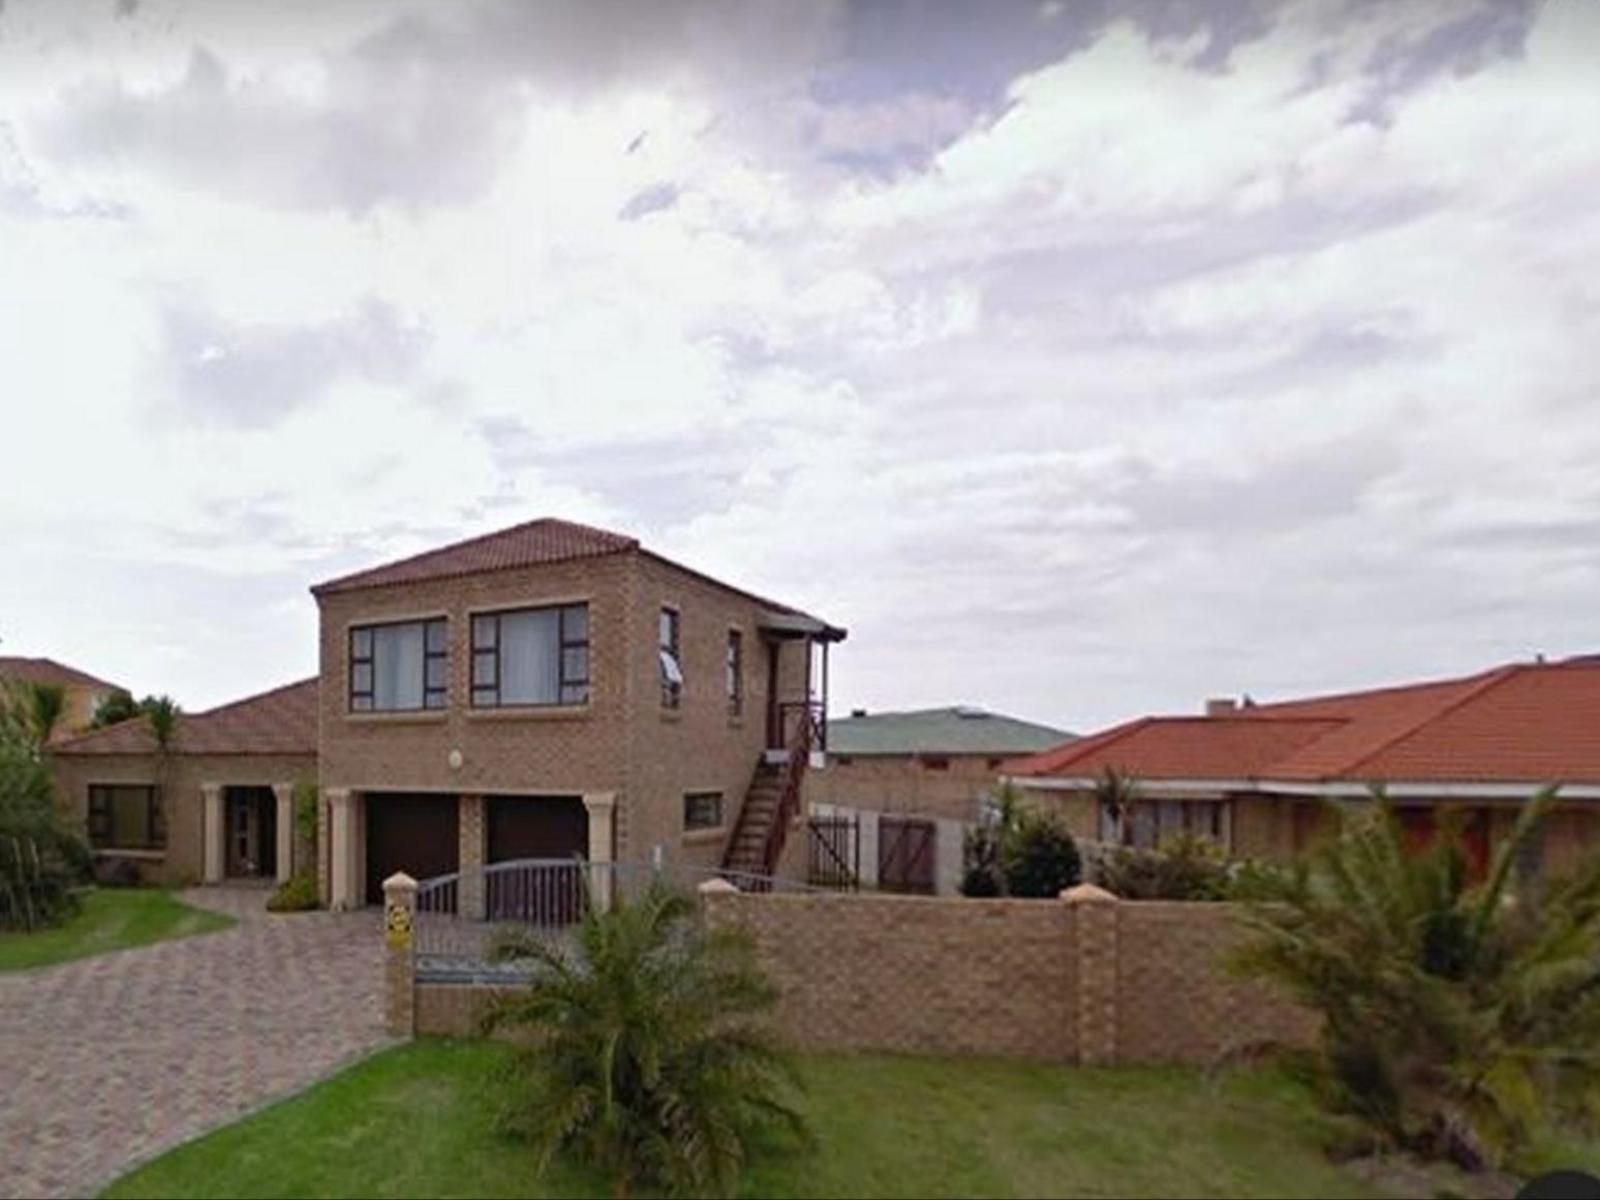 Sunset Events And Accommodation Summerstrand Port Elizabeth Eastern Cape South Africa House, Building, Architecture